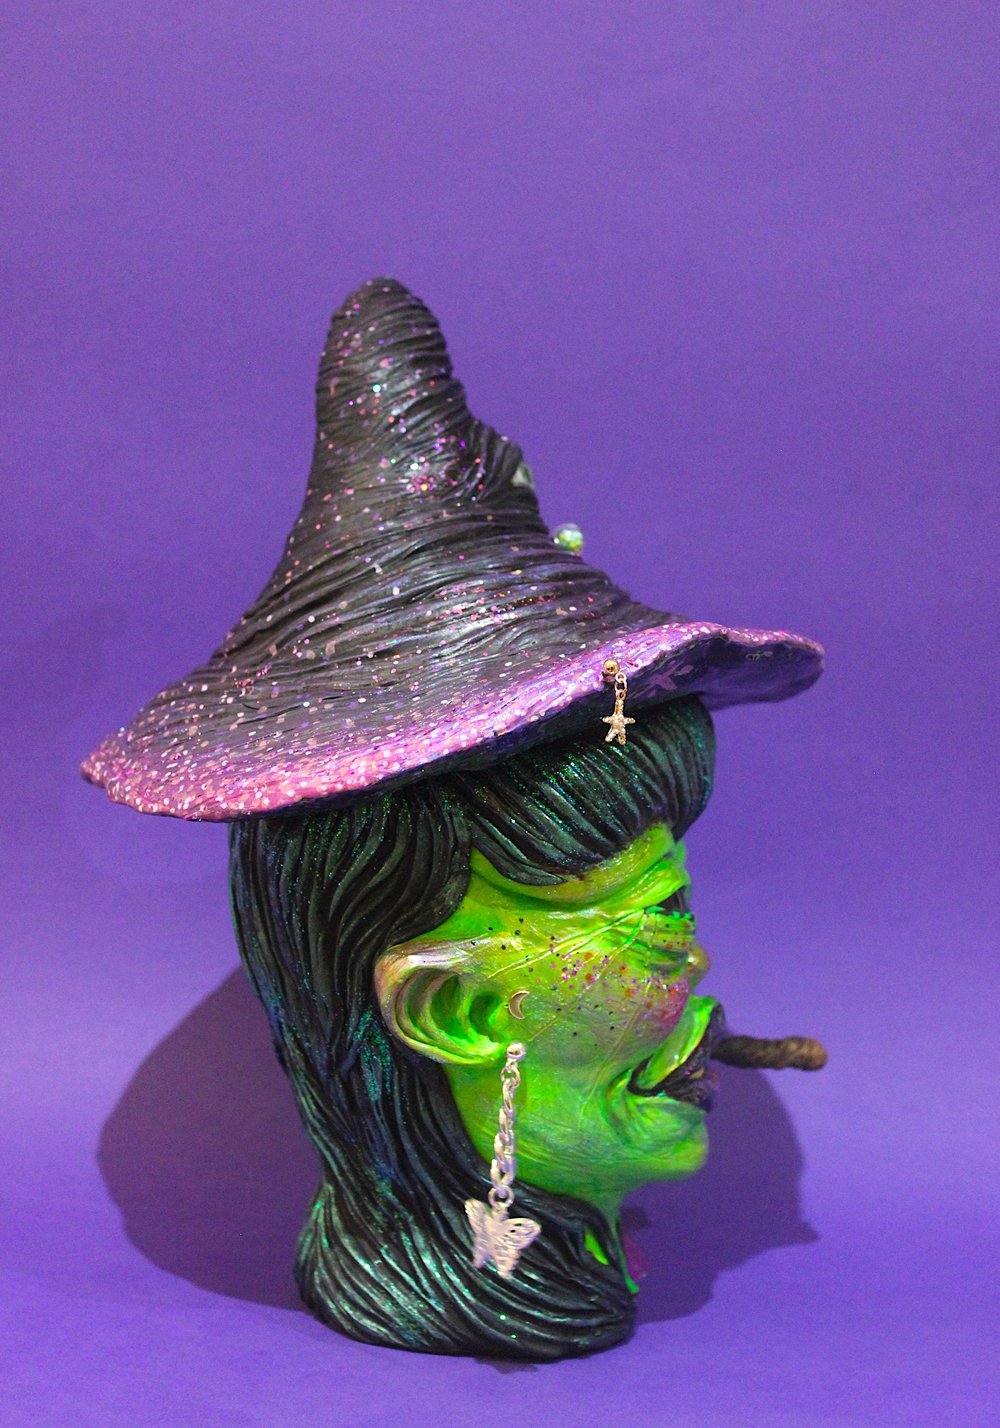 Mchawi Witch incense holder